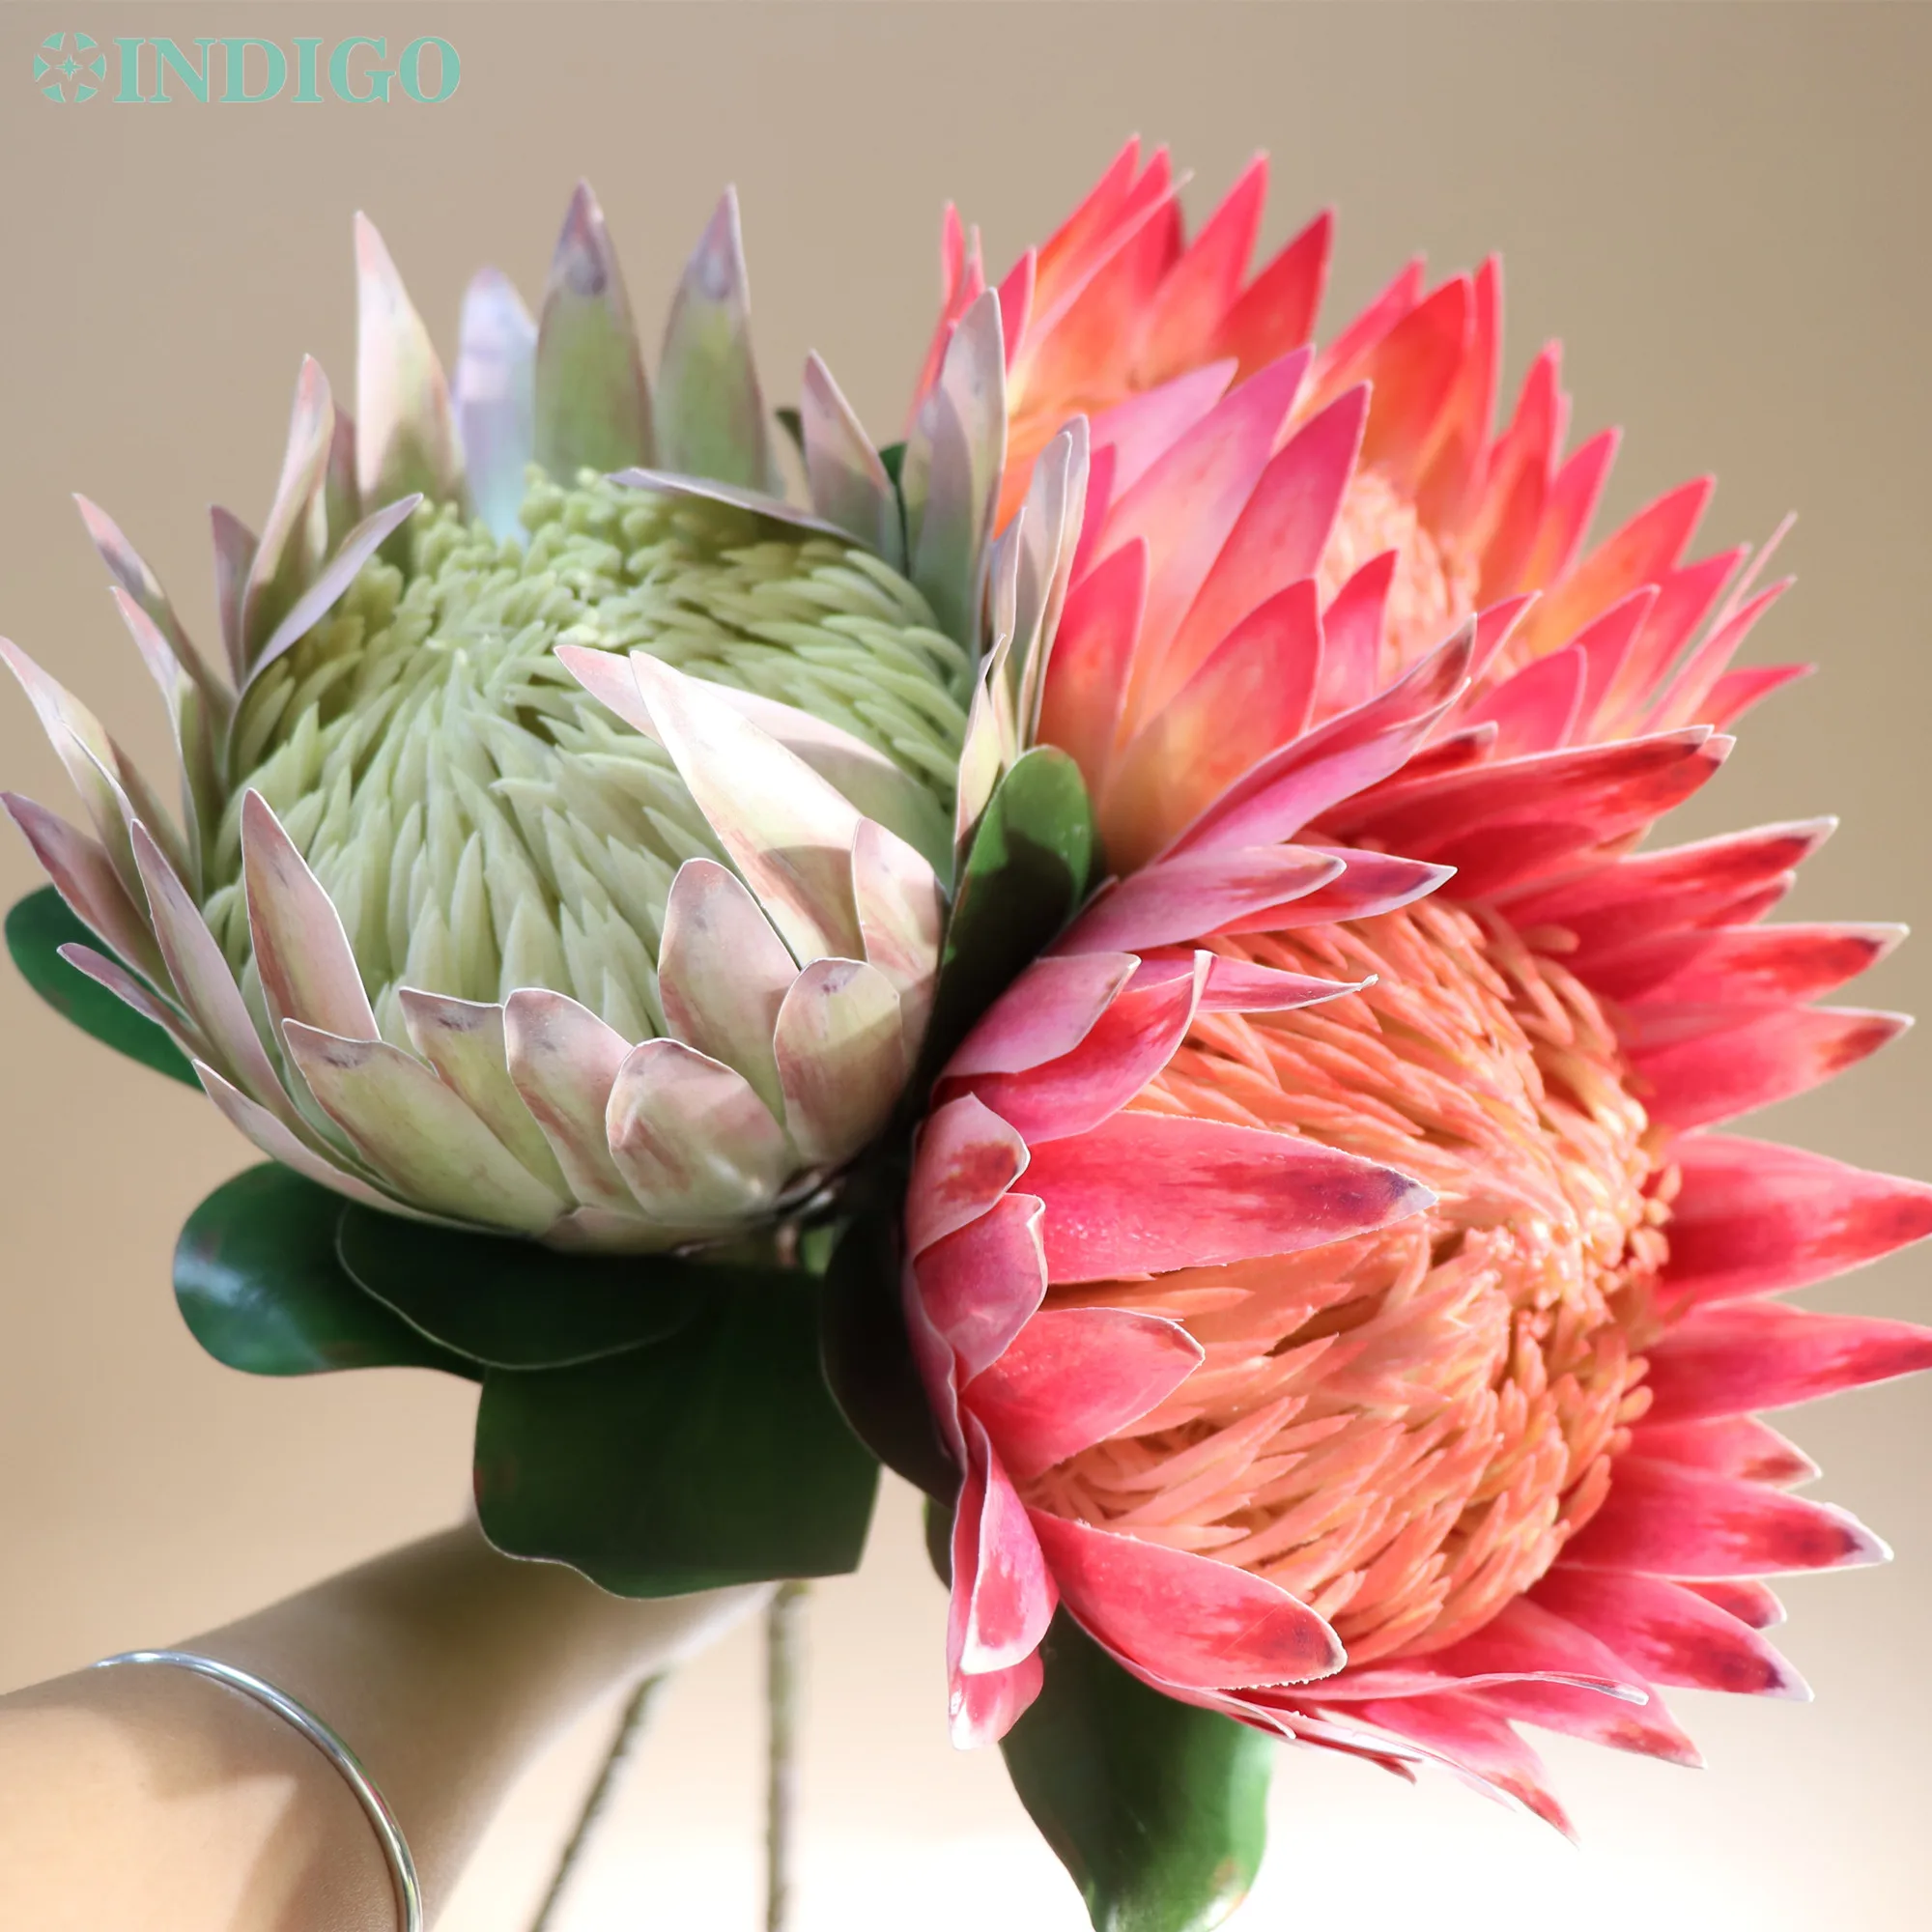 

Pink Protea Cynaroides Large Size Head 13x16CM Real Touch Artificial Flower Wedding Party Event Christmas Decoration - INDIGO